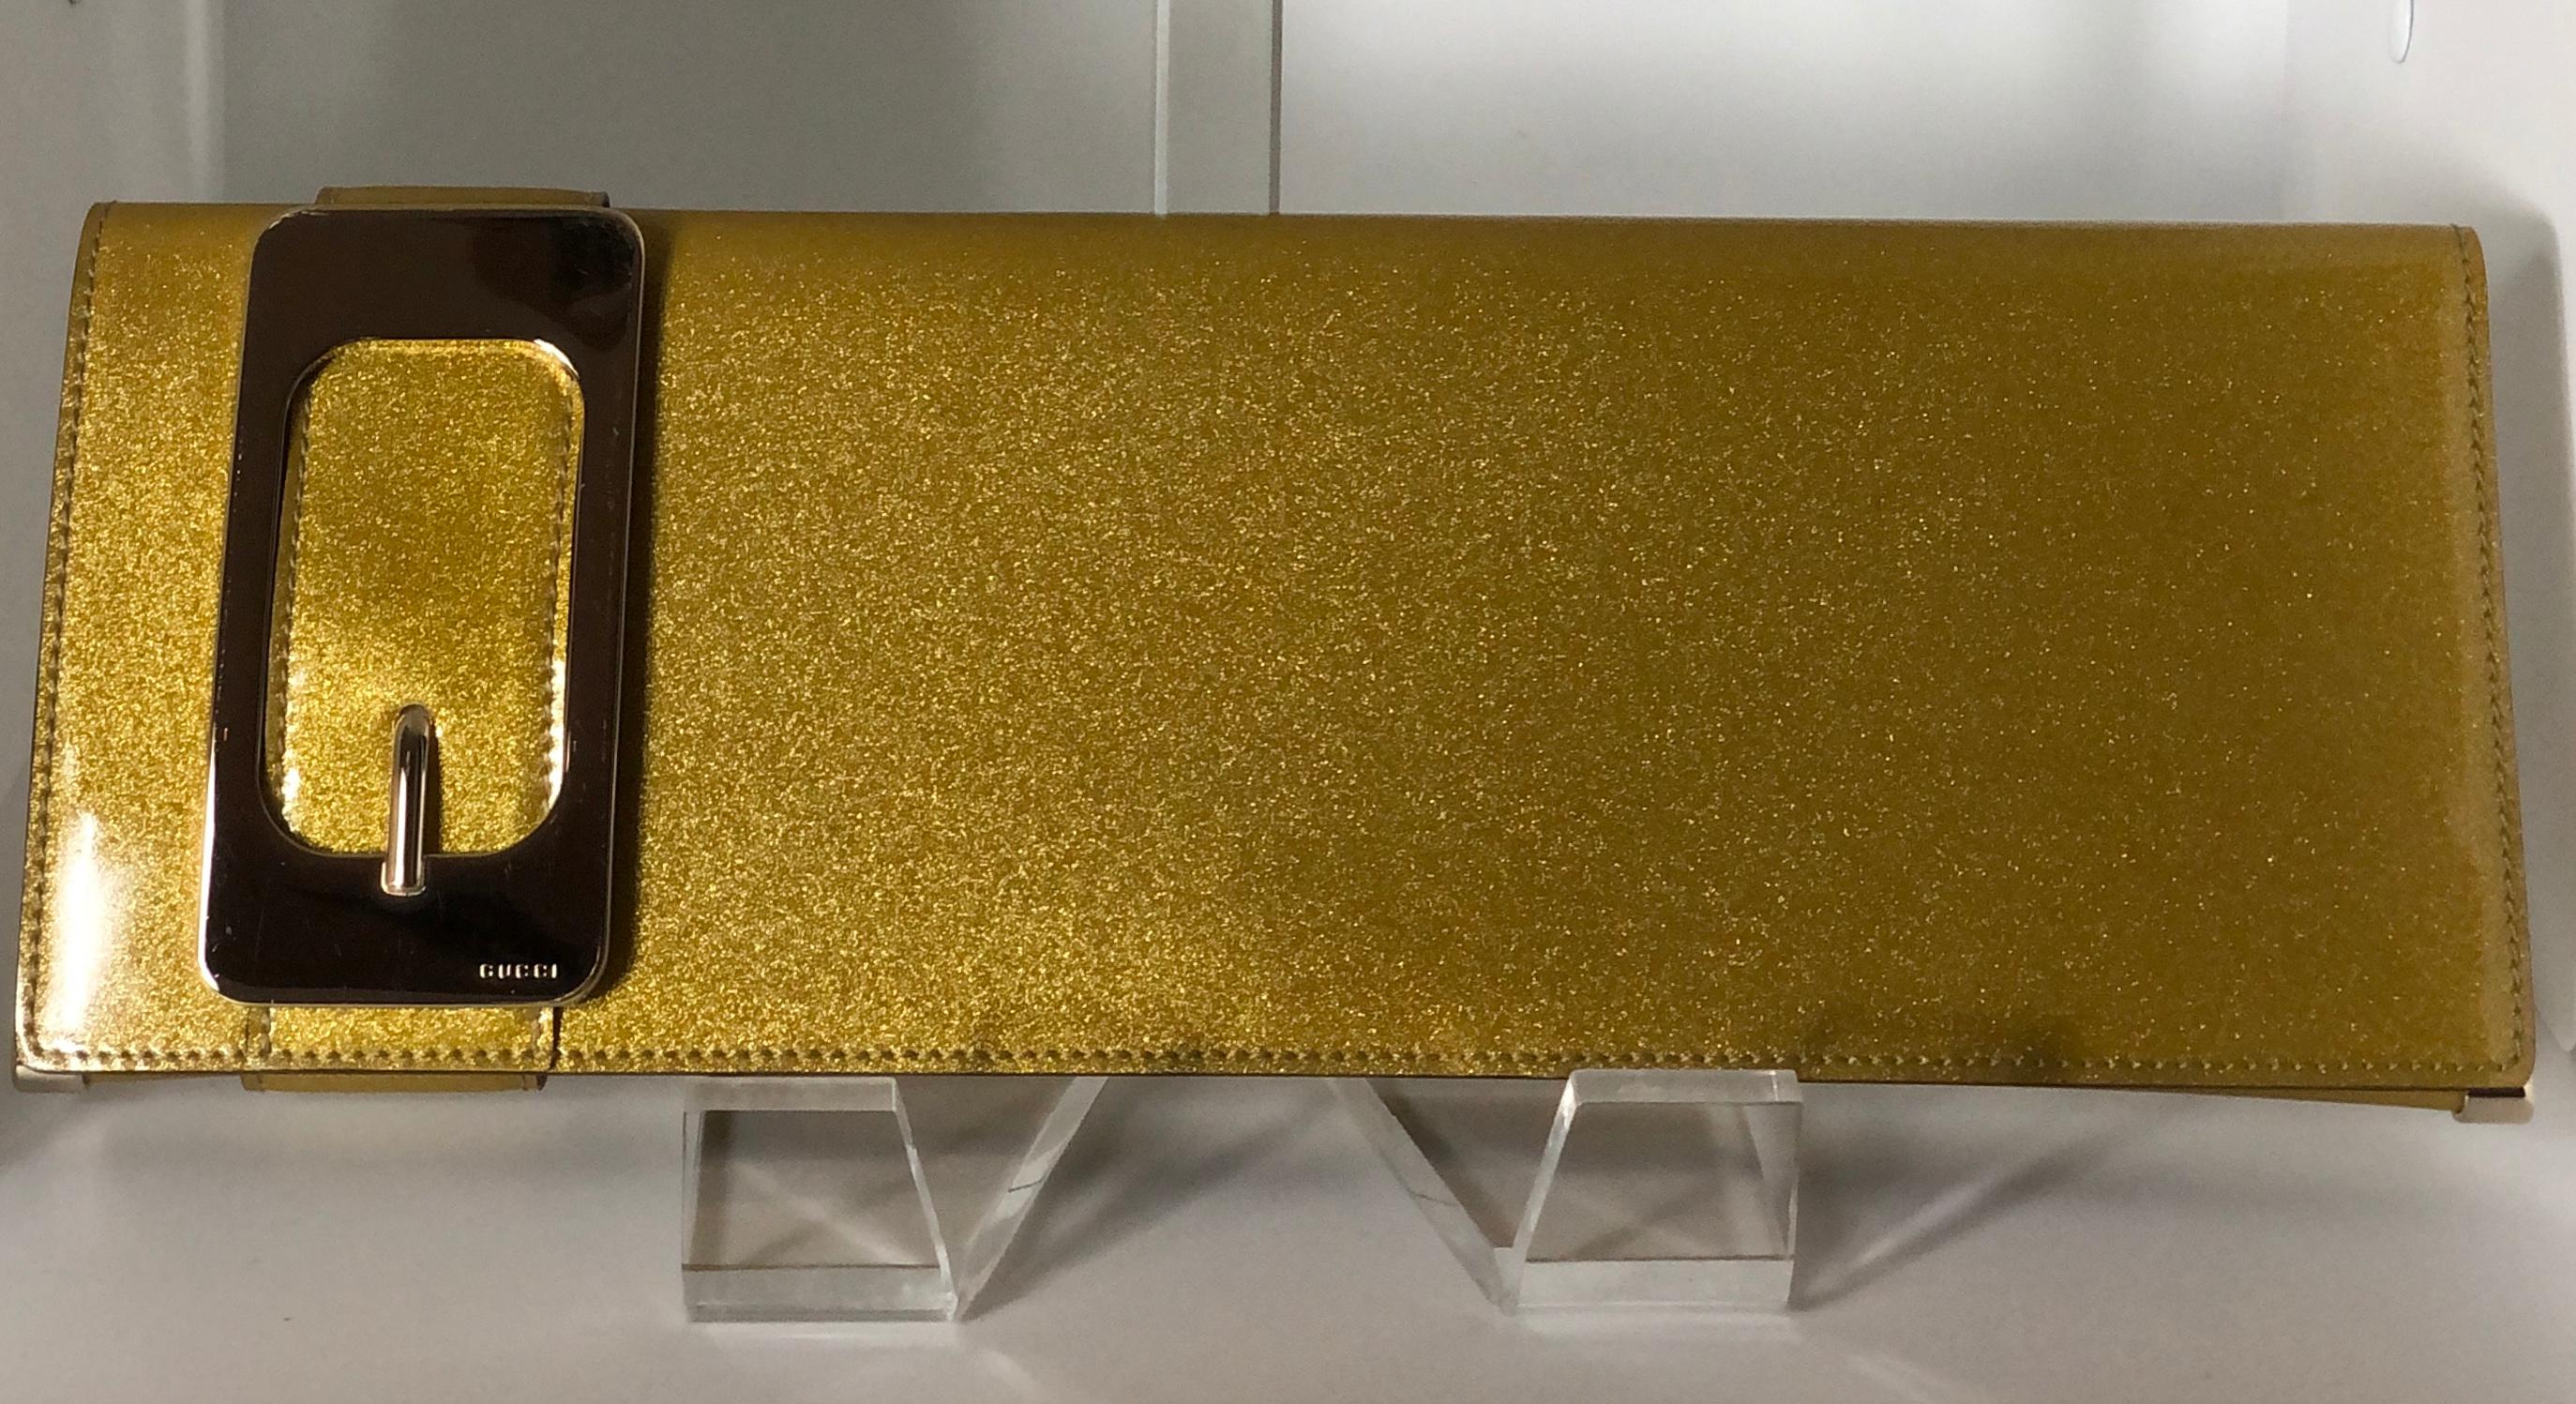 Brown Gucci Iridescent Gold Patent Leather Elongated Clutch with Gold Metal Accents For Sale